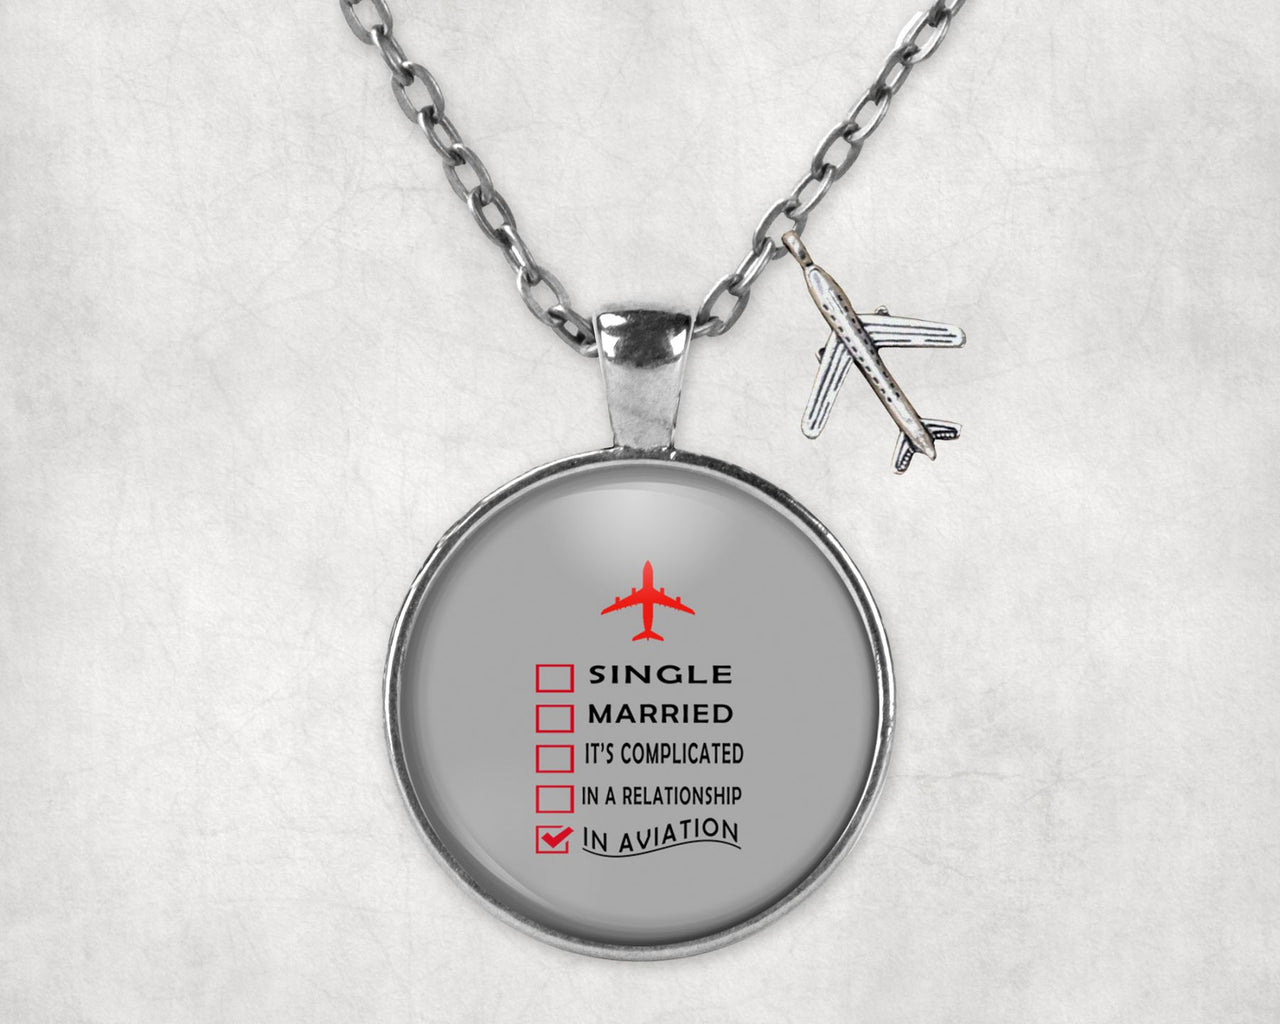 In Aviation Designed Necklaces